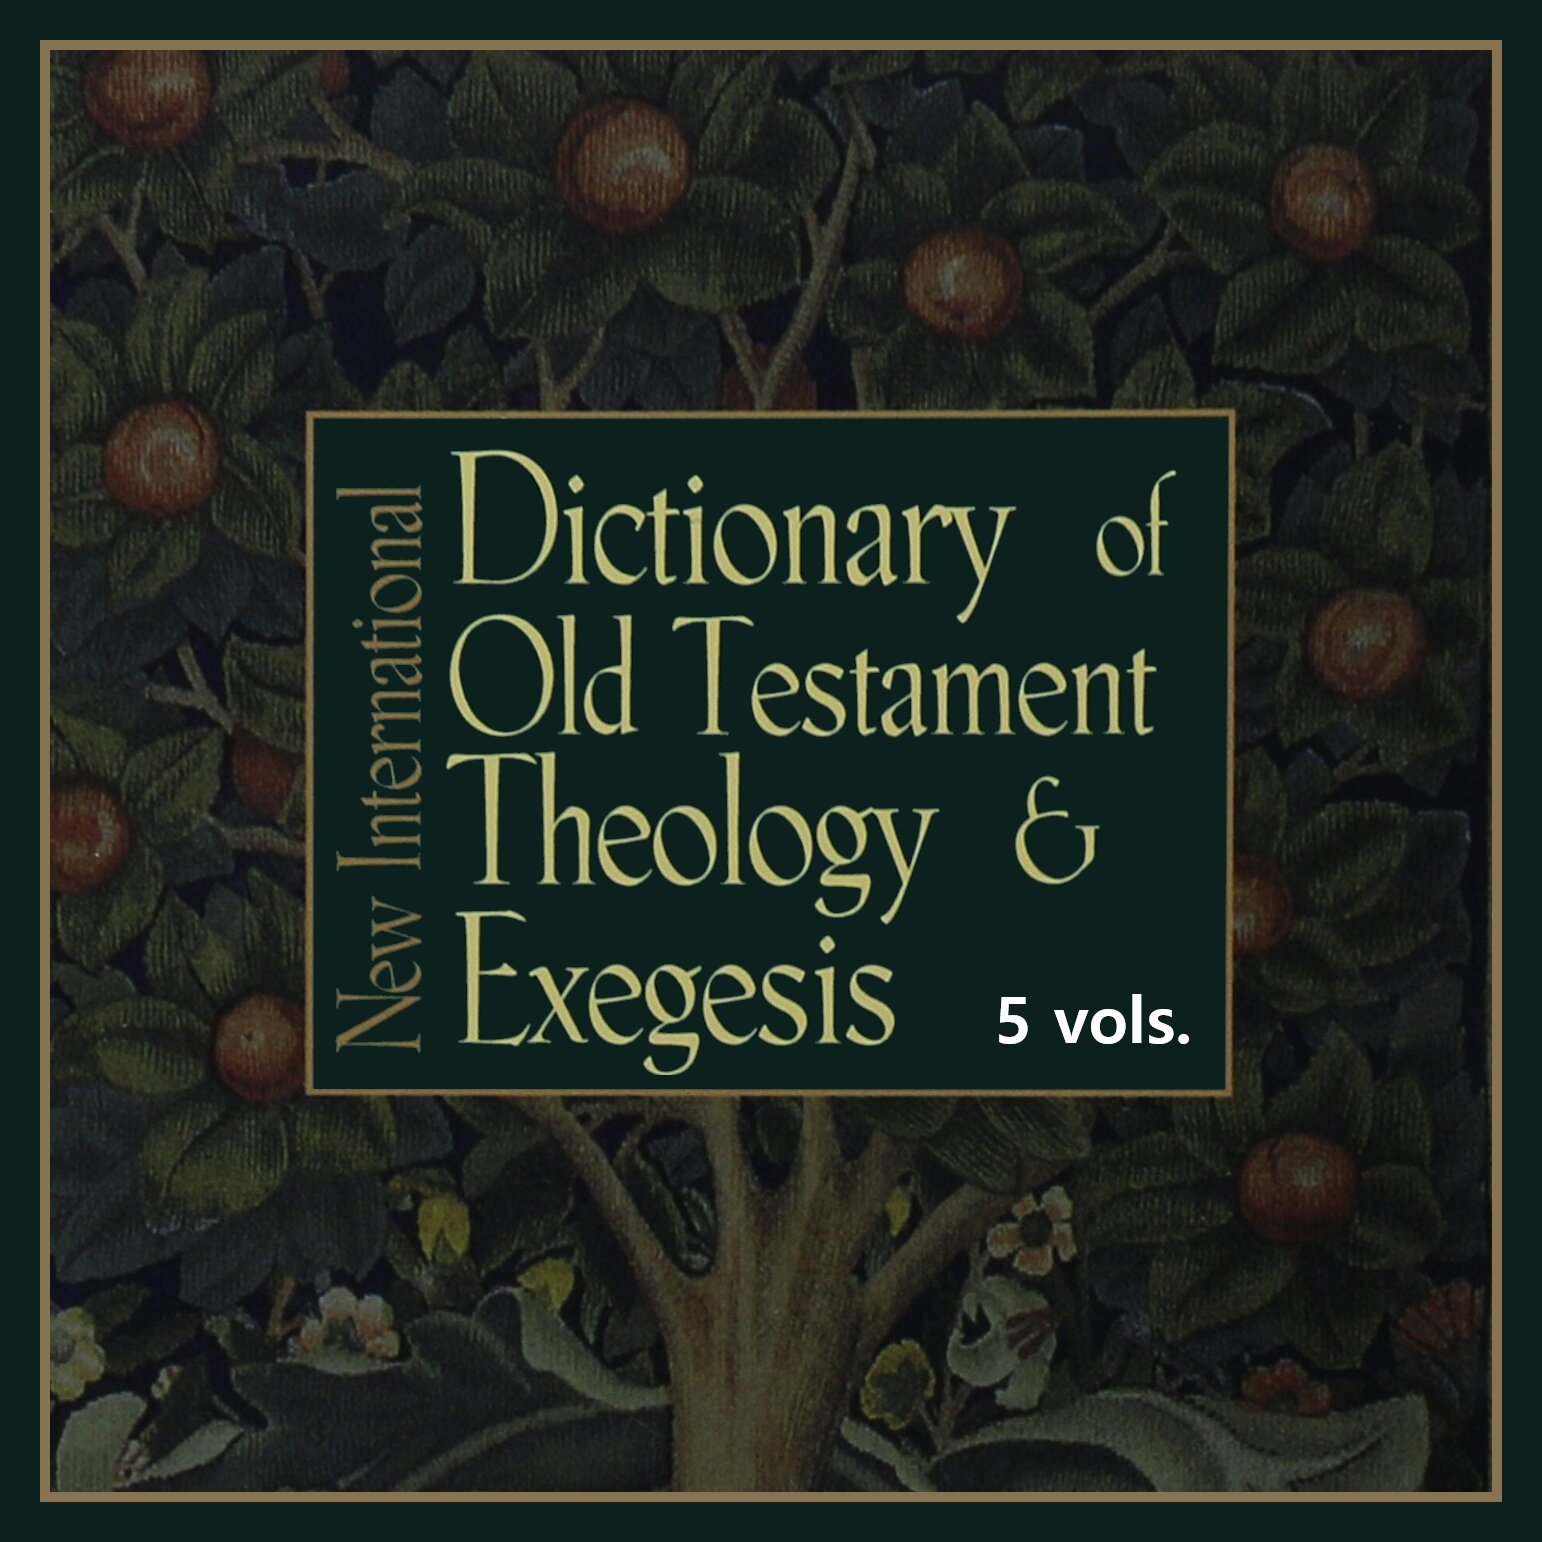 New International Dictionary of Old Testament Theology and Exegesis | NIDOTTE (5 vols.)